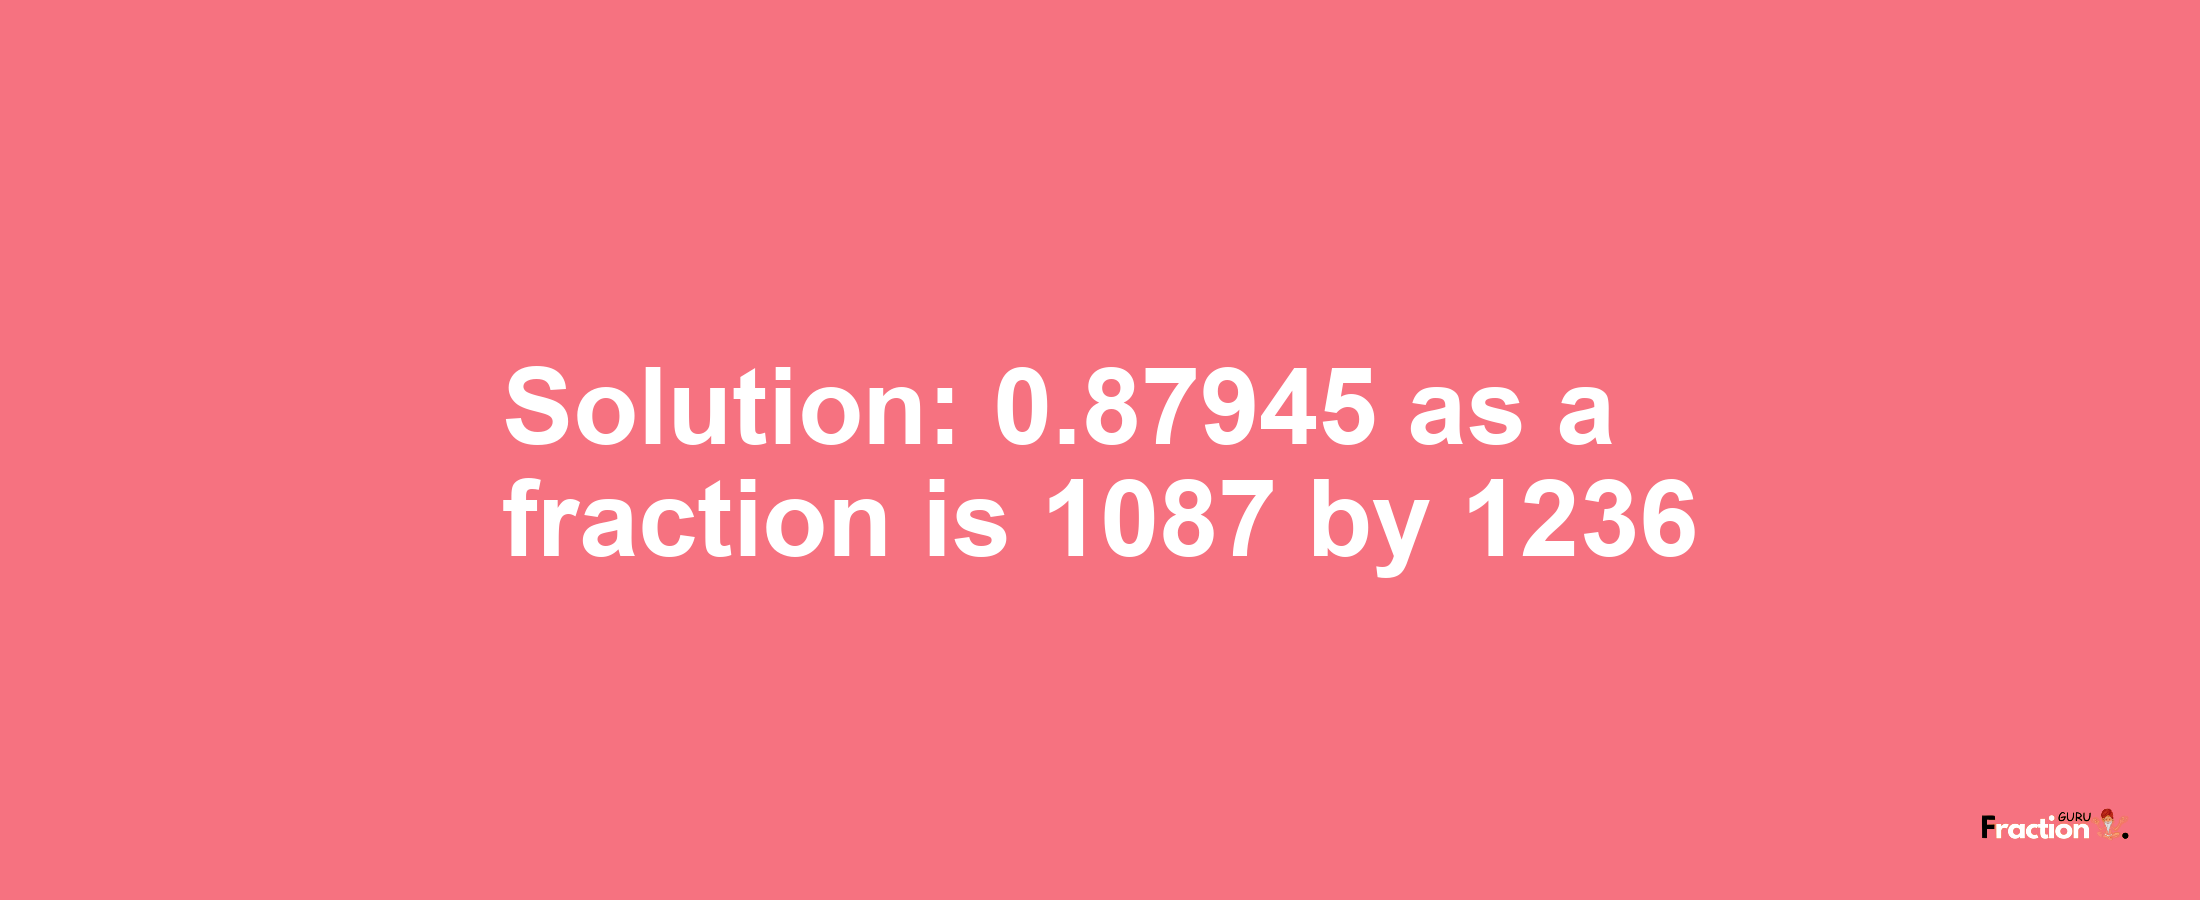 Solution:0.87945 as a fraction is 1087/1236